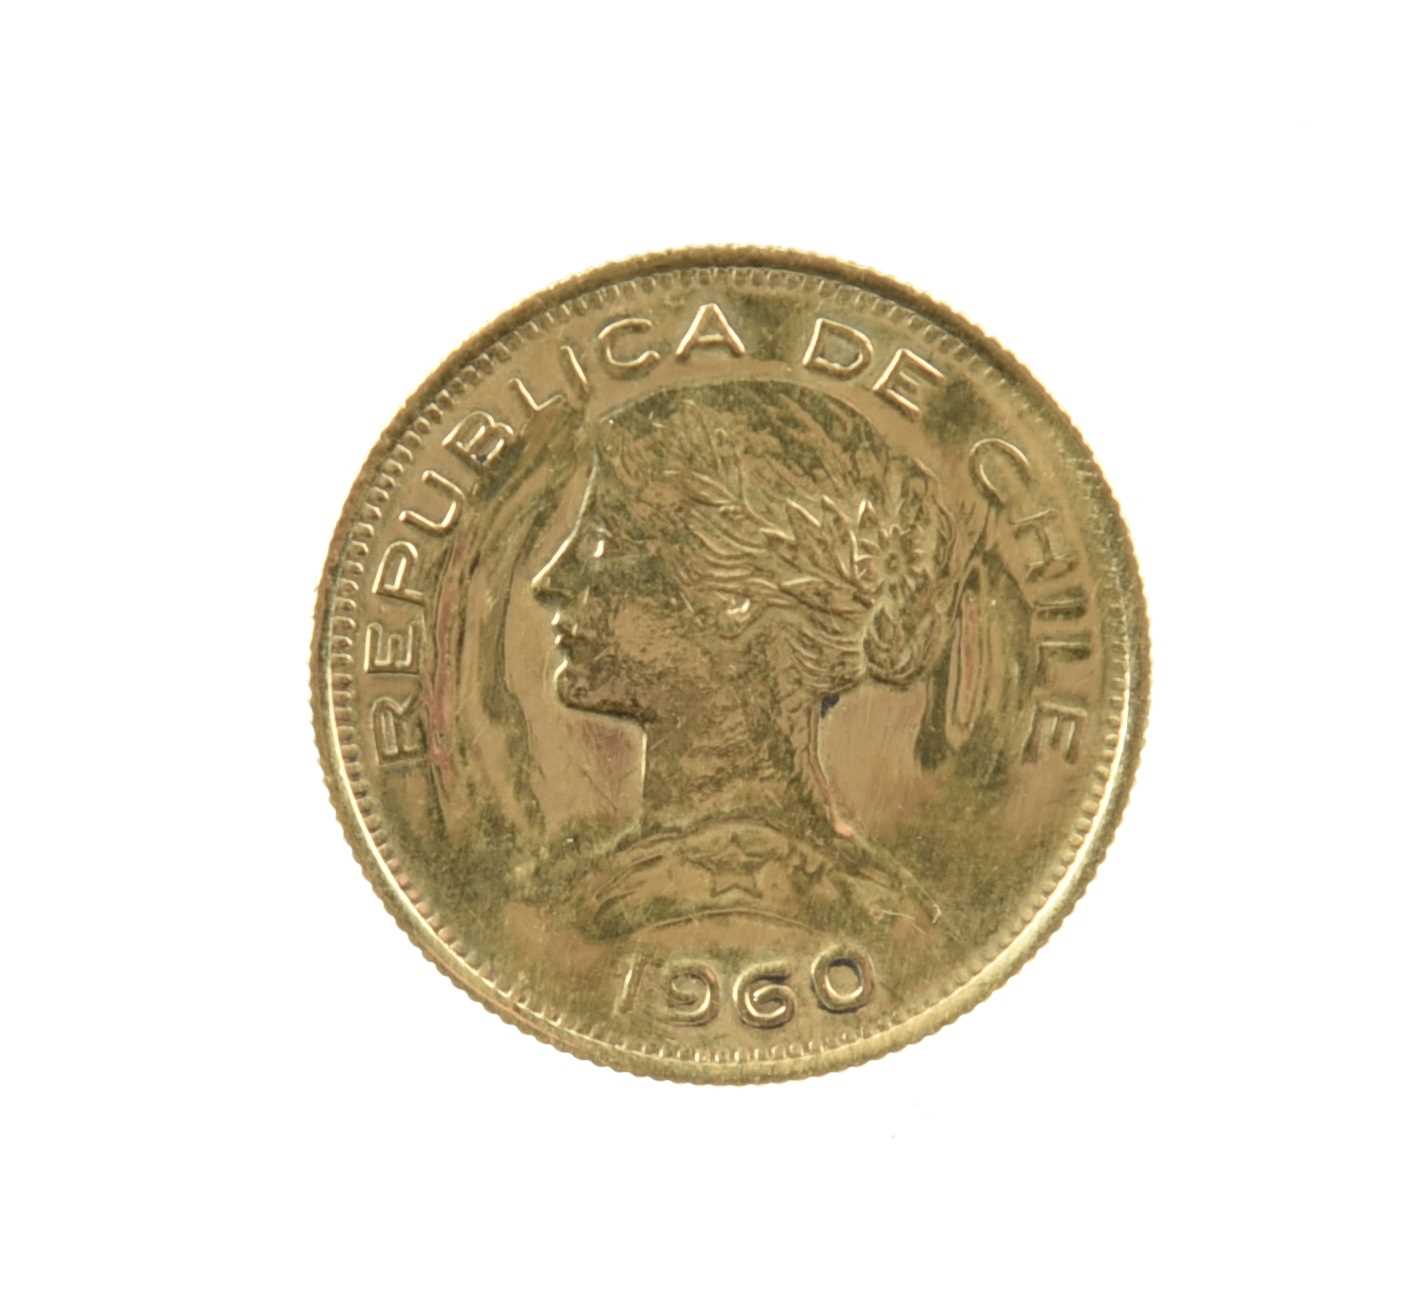 Chile - Republic: gold 100 pesos, 1960, Liberty head with coiled hair (F 54), nearly extremely fine.